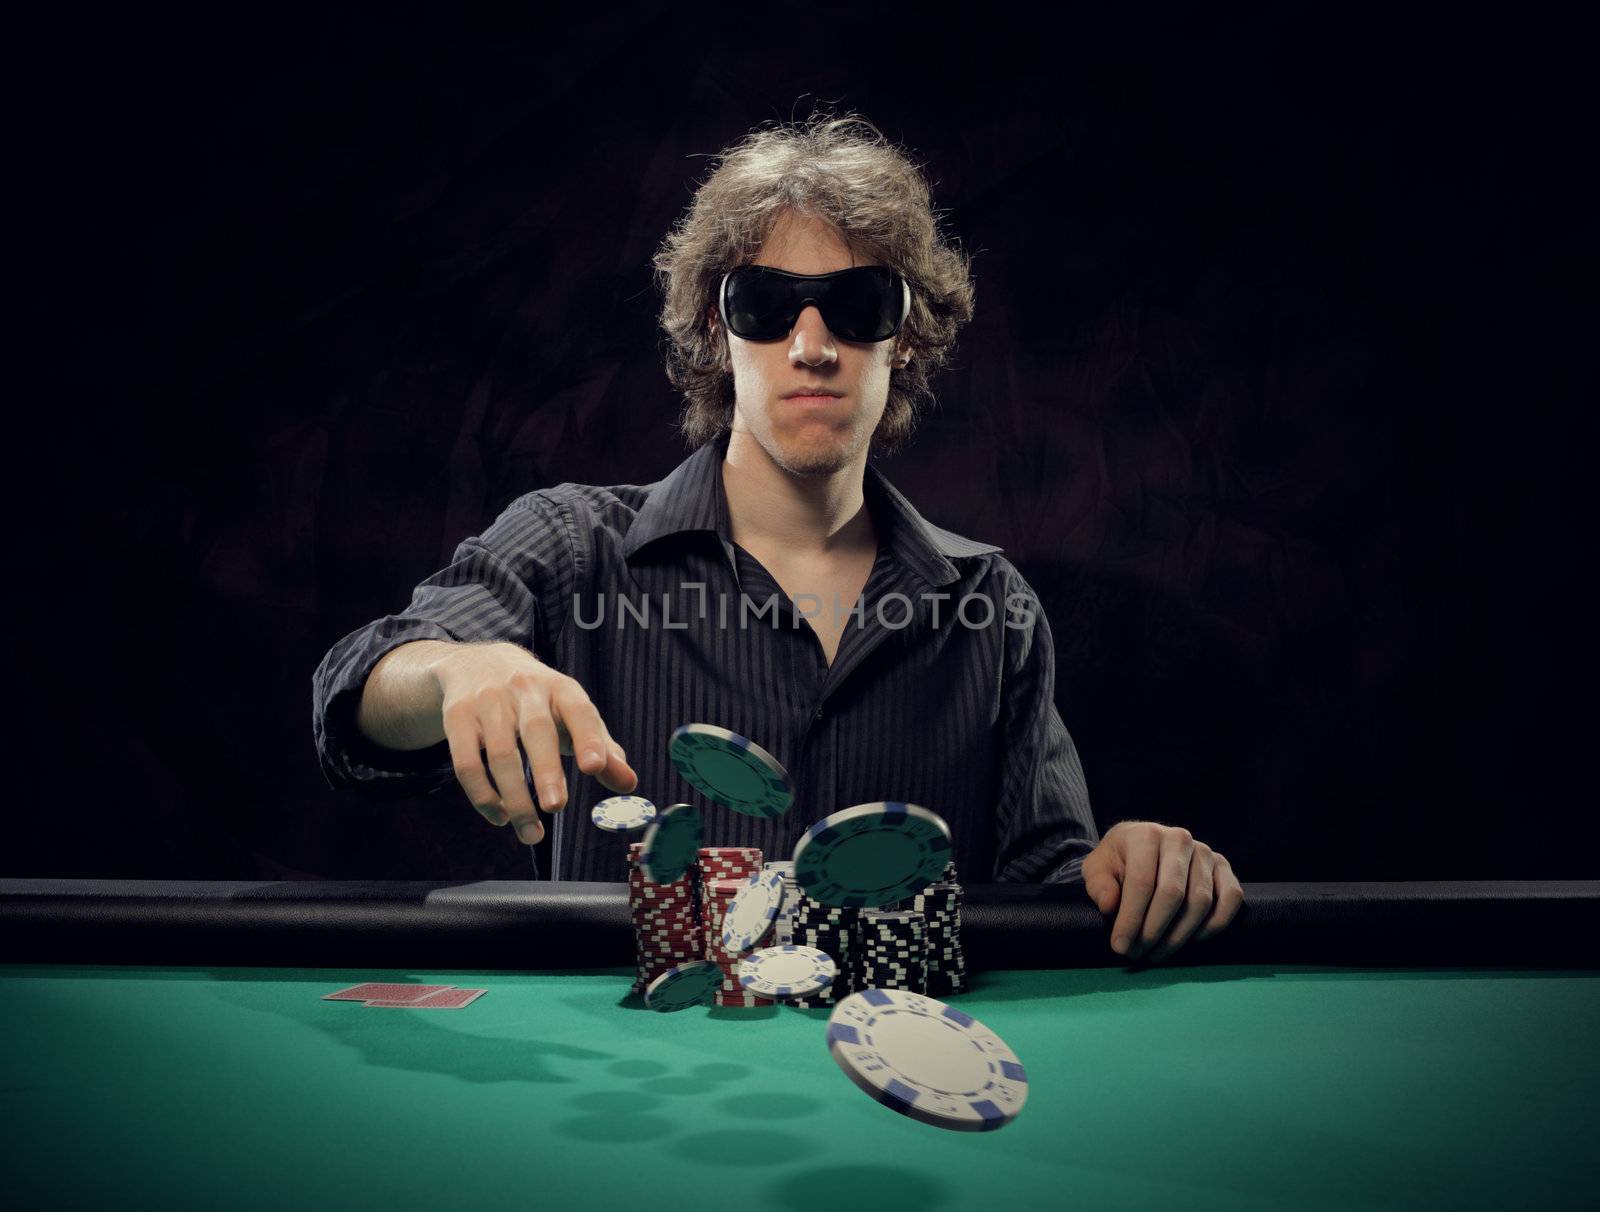 Poker player at a poker table throwing his chips